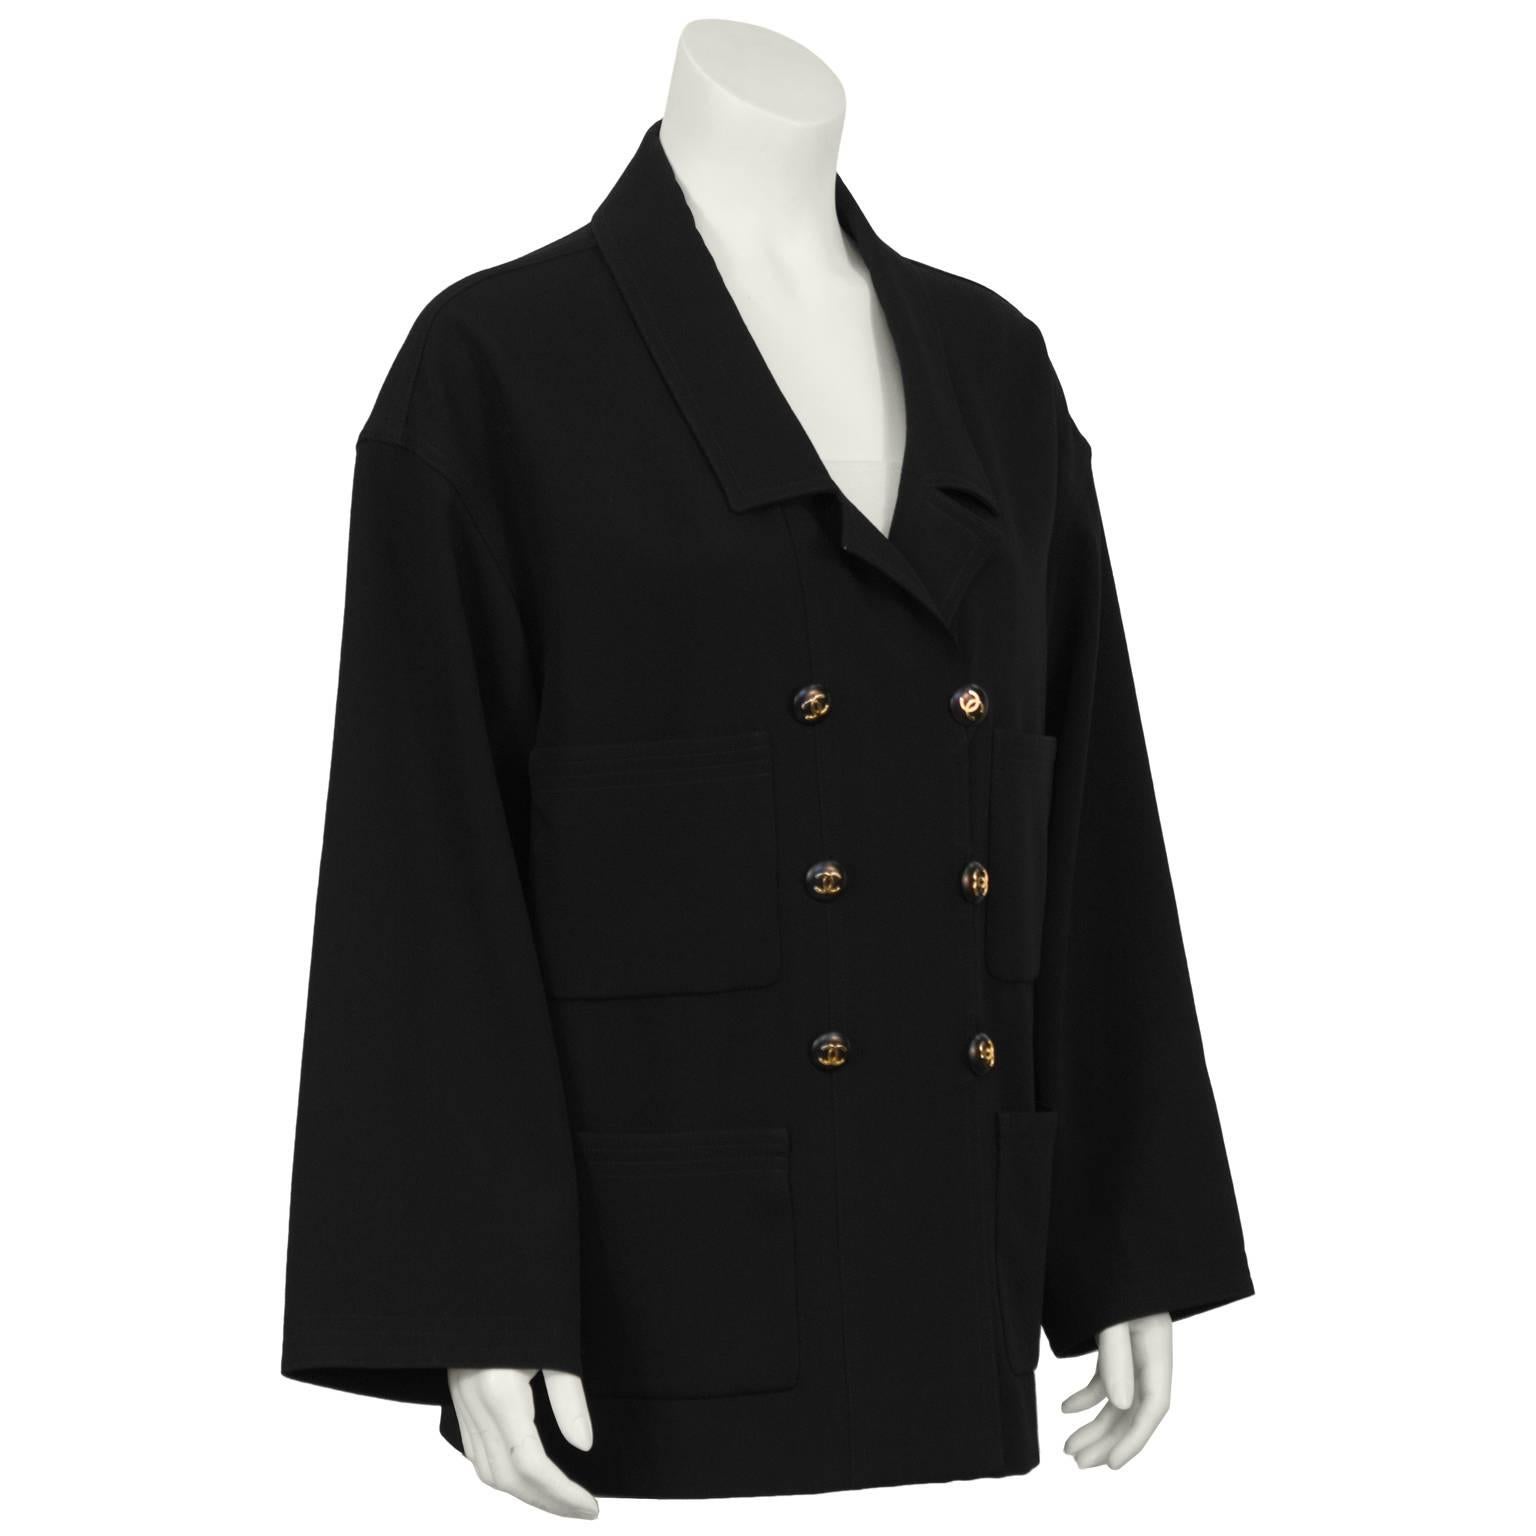 Late 1980's Chanel black wool-crepe deconstructed blazer. Features a notched lapel, double breasted with black and gold CC logo buttons, four front patch pockets. Overall relaxed fit and loose fitting sleeves. Excellent condition. Fits like a US 4-6